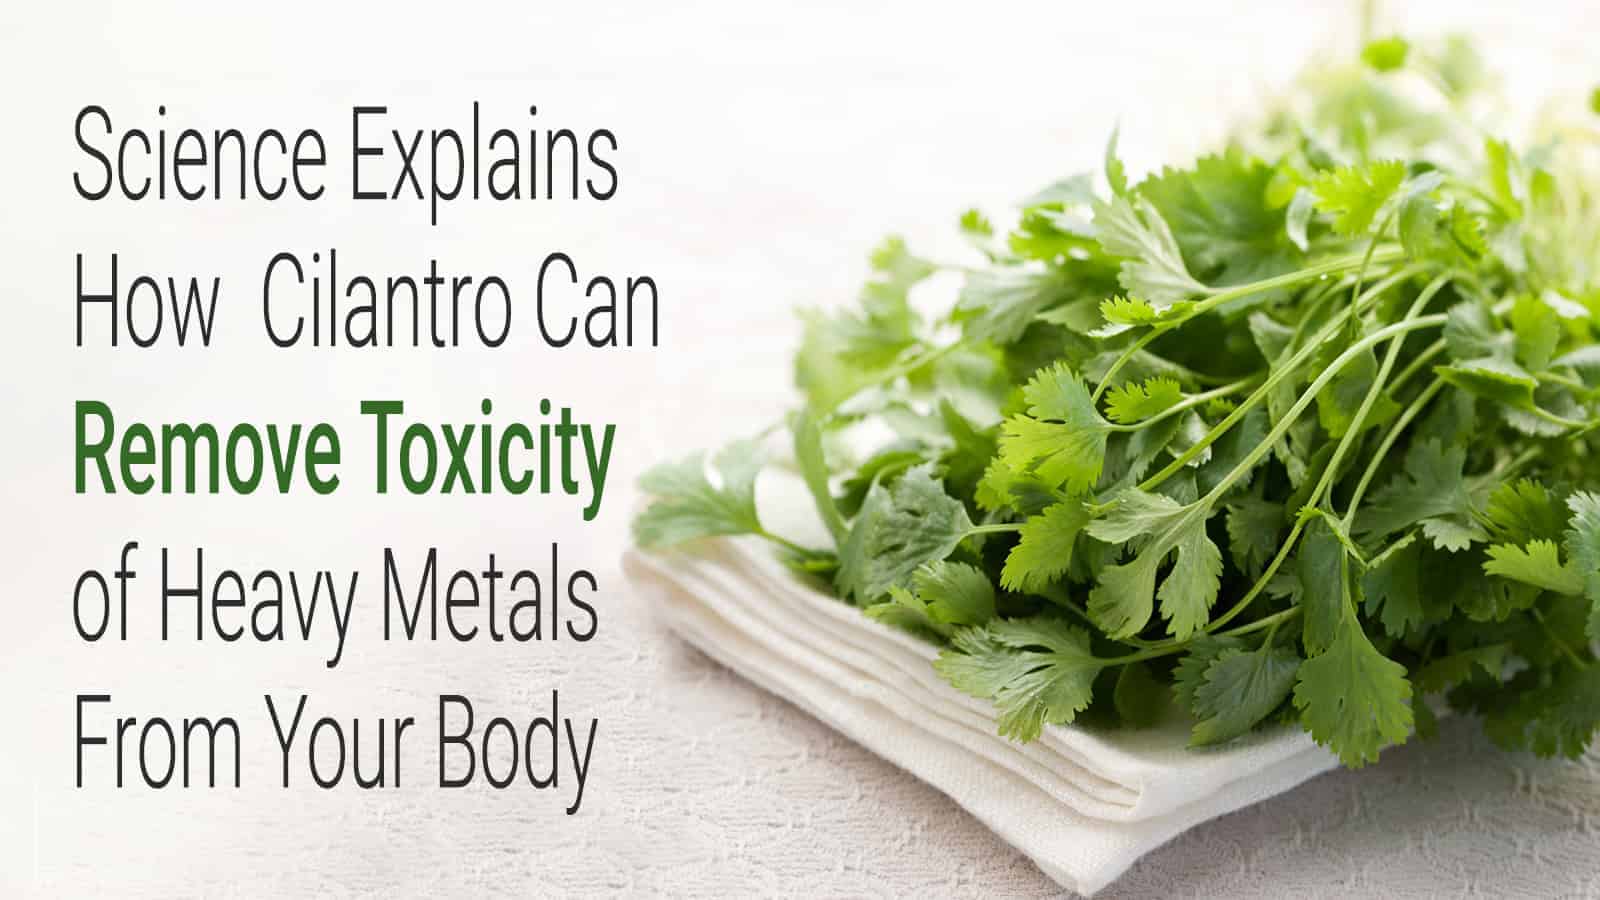 Science Explains How Cilantro Can Remove Toxicity of Heavy Metals From Your Body